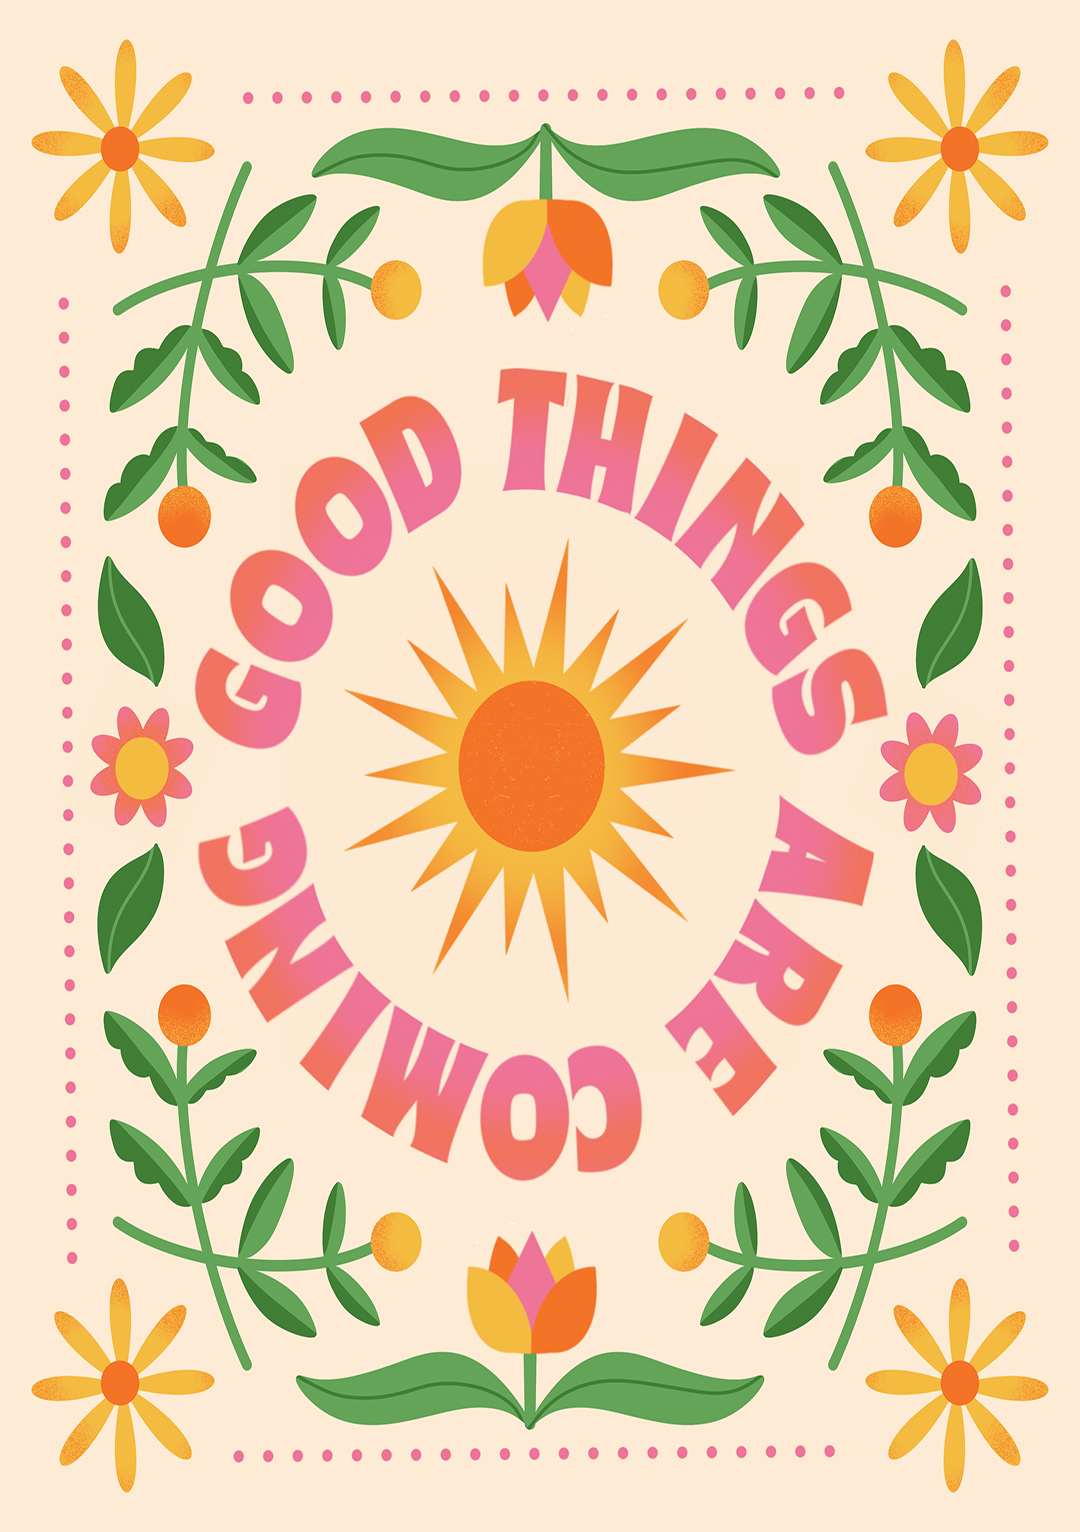 Good Things Are Coming - Inspirational Greeting Card